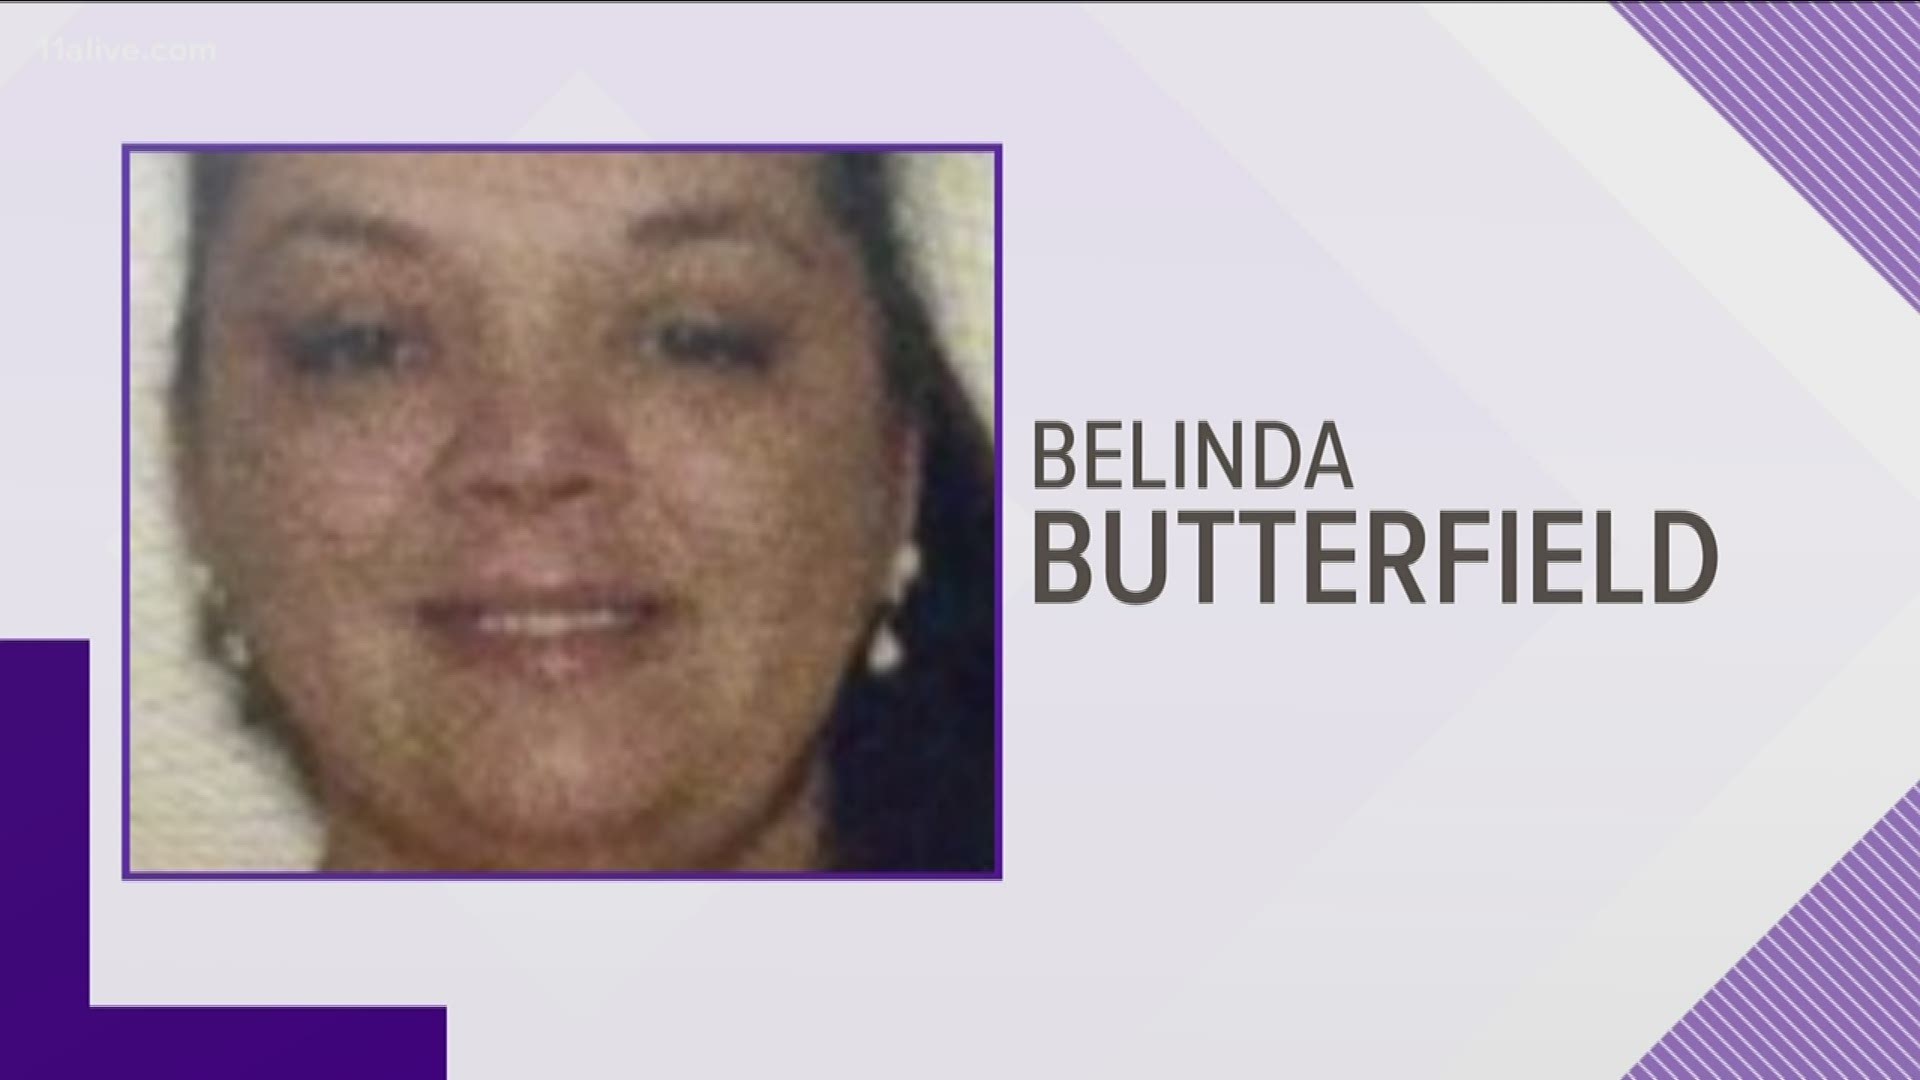 The woman found in Chestatee Creek is Belinda Butterfield, police confirmed.